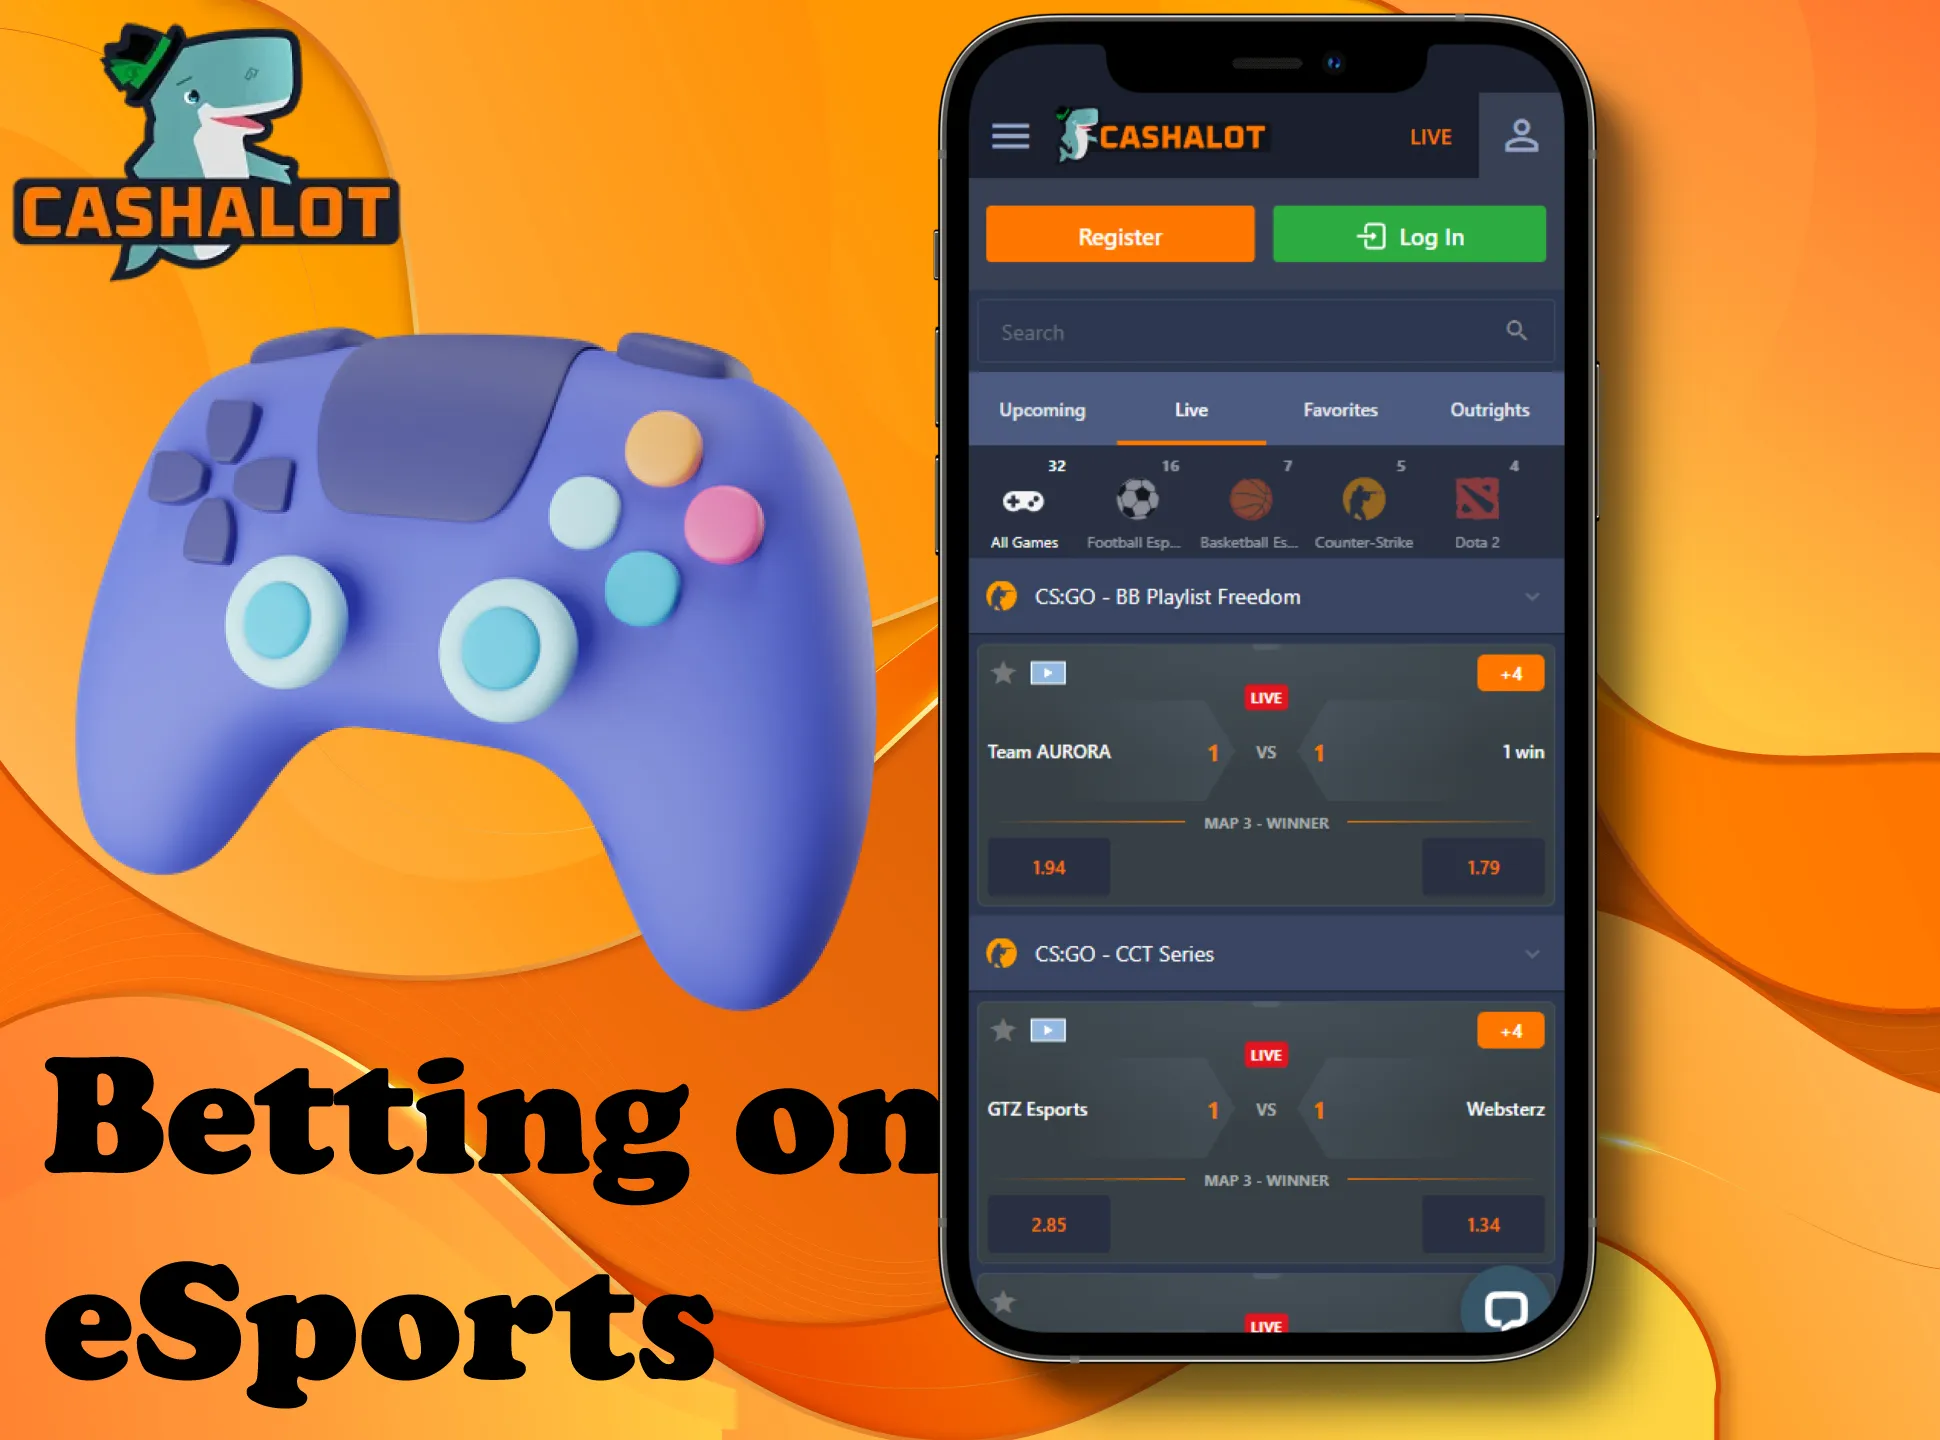 Bet on the most exciting esports matches in the Cashalot app.